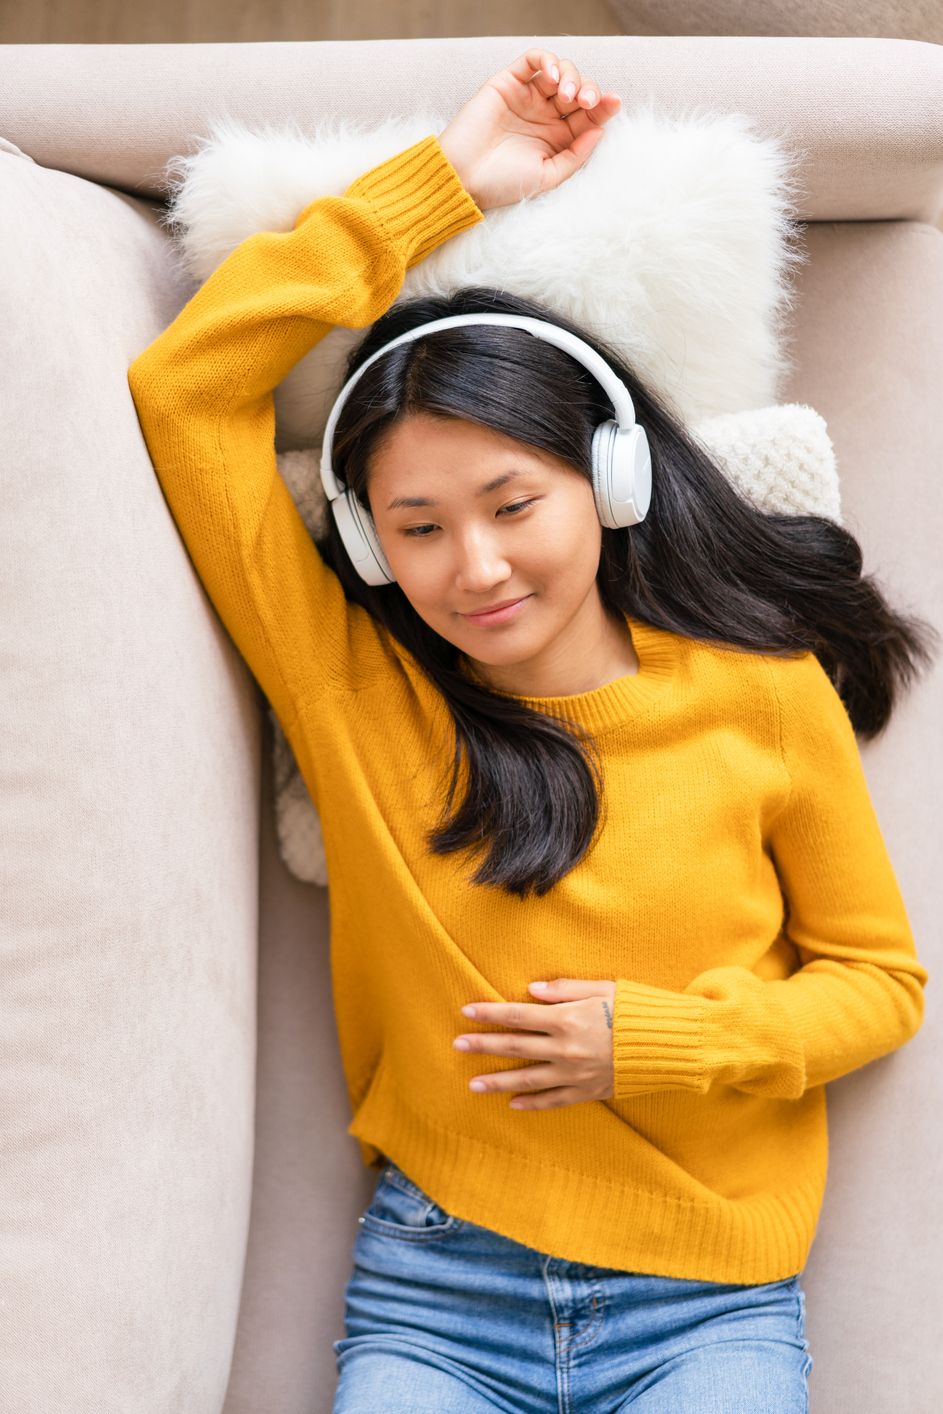 Happy asian woman lying on sofa listening to music in headphones. Enjoying audio playing in earphones. Relaxing, chilling at home. Positive emotions. Emotional spiritual health. Well-being, wellness with meditation. Enjoying good moments, slow life niksen